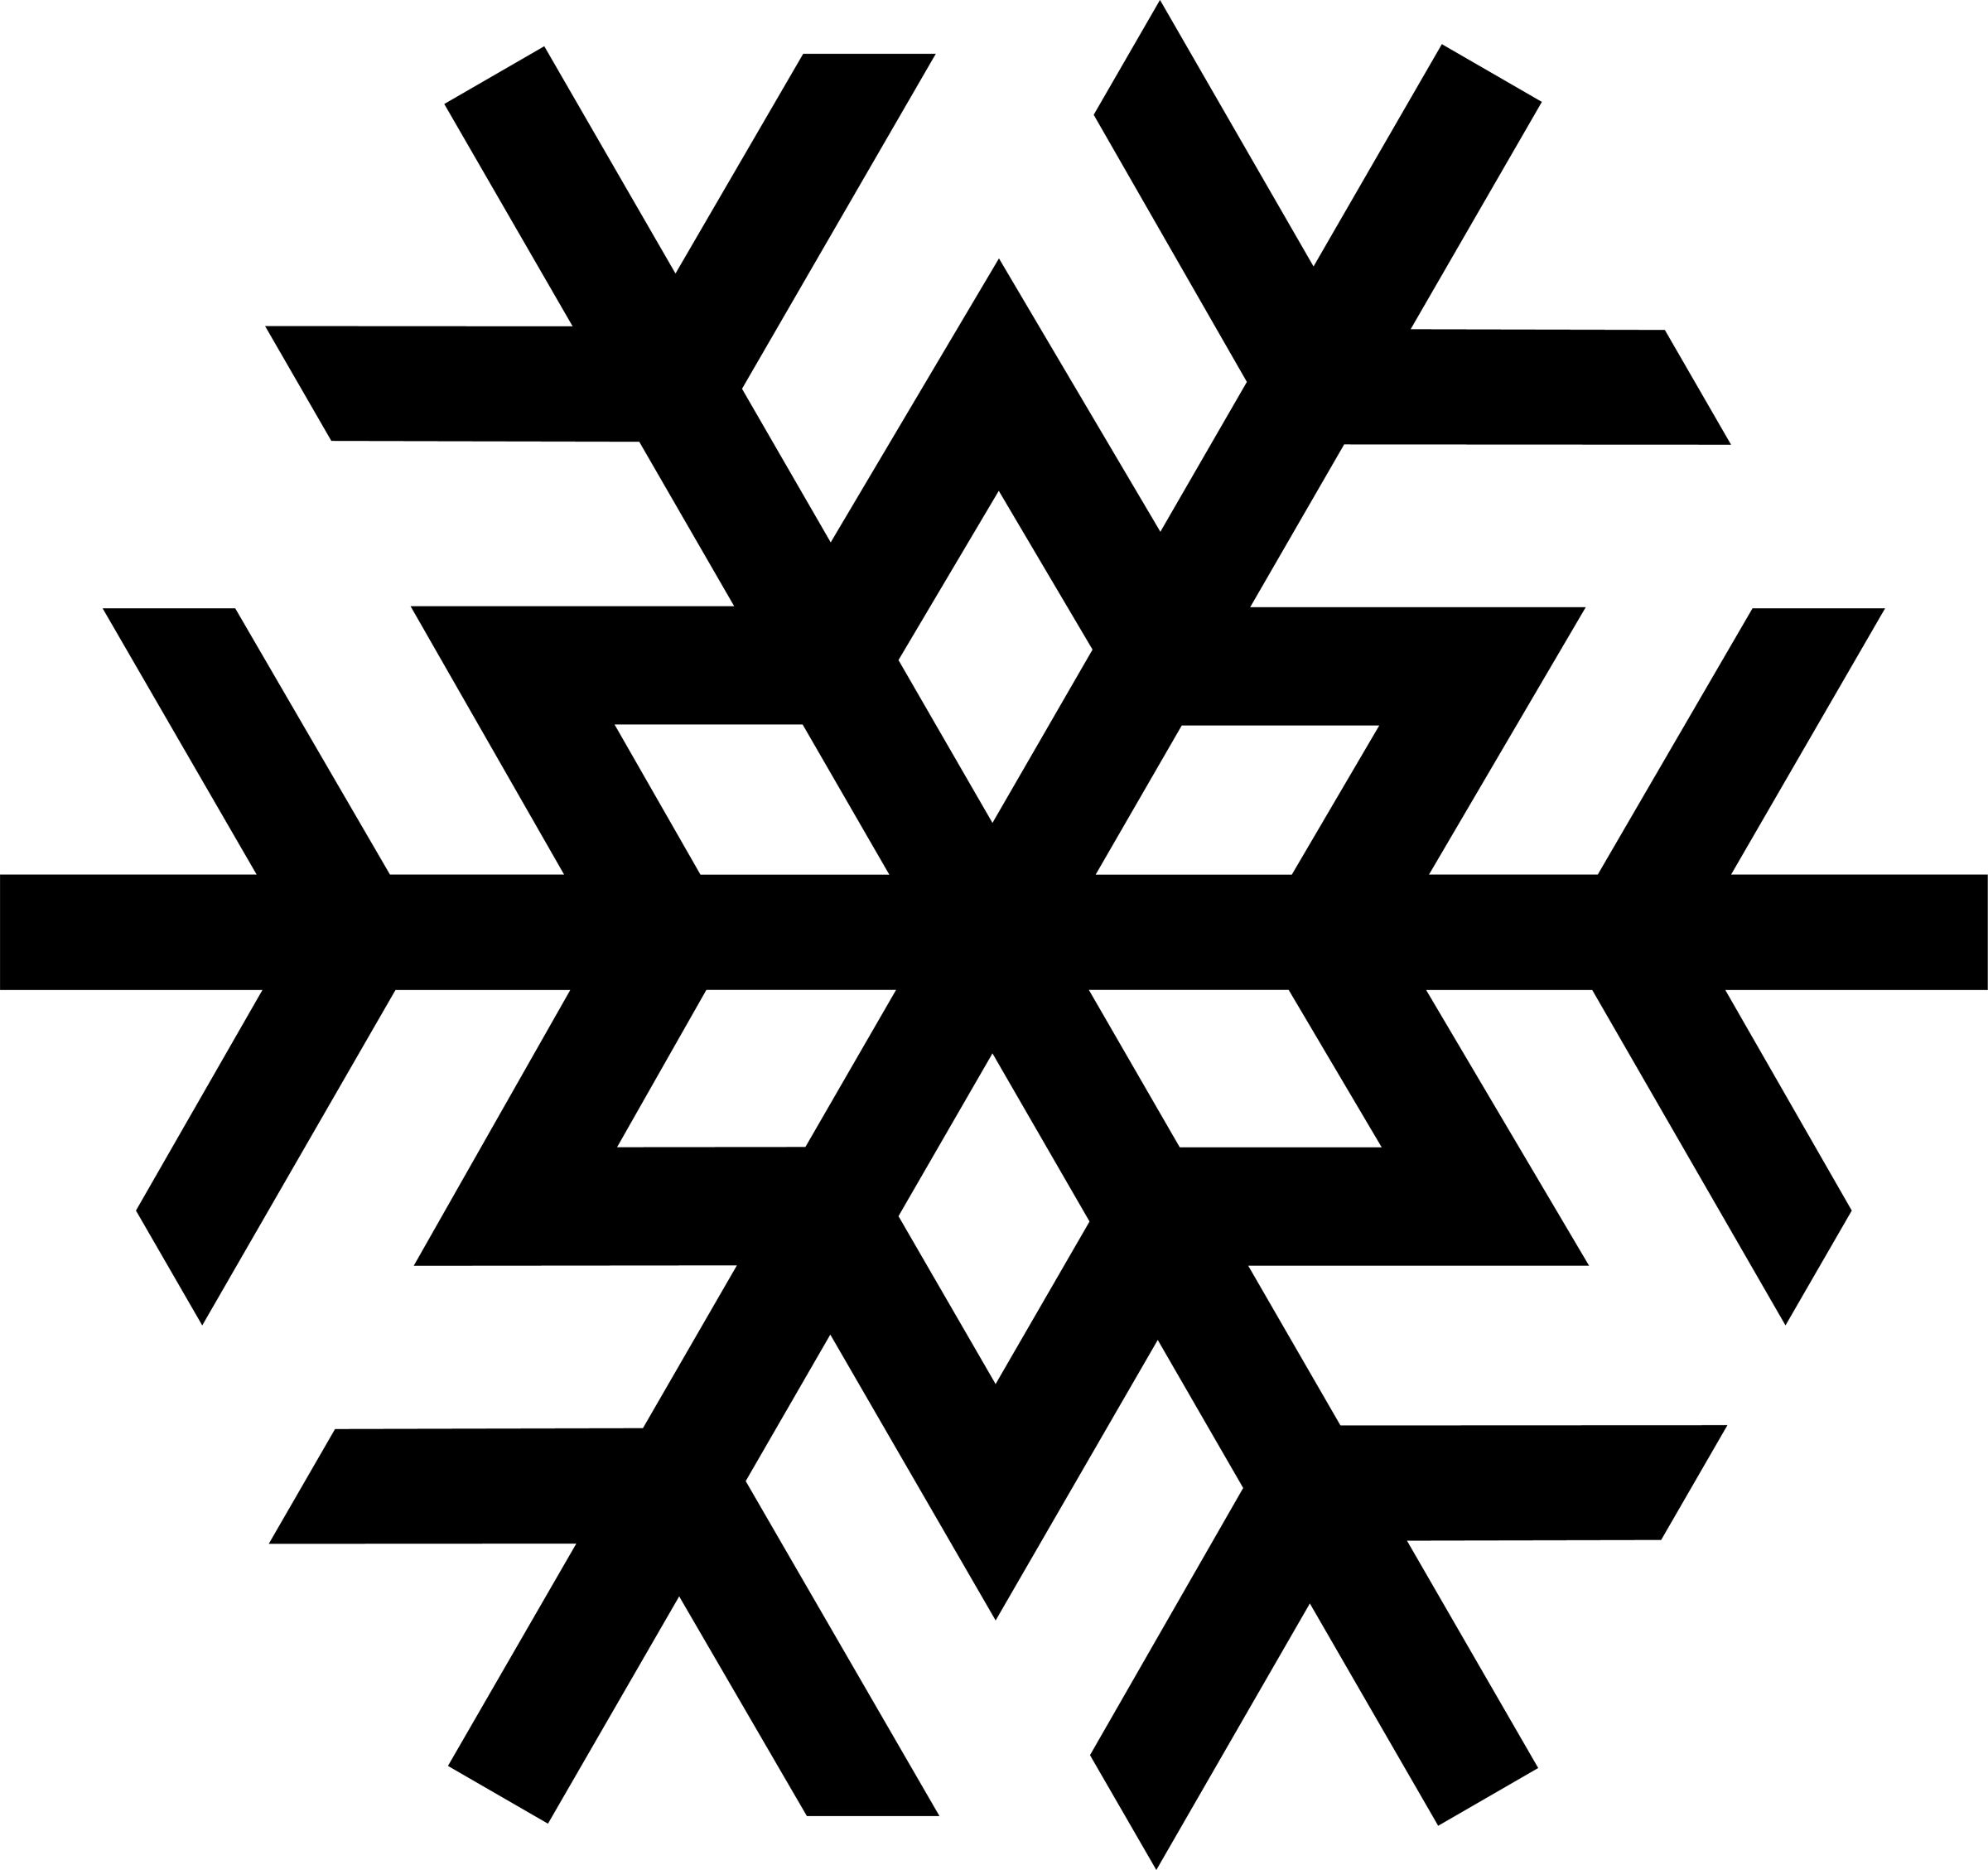 Free clip art images. Snowflake clipart basic